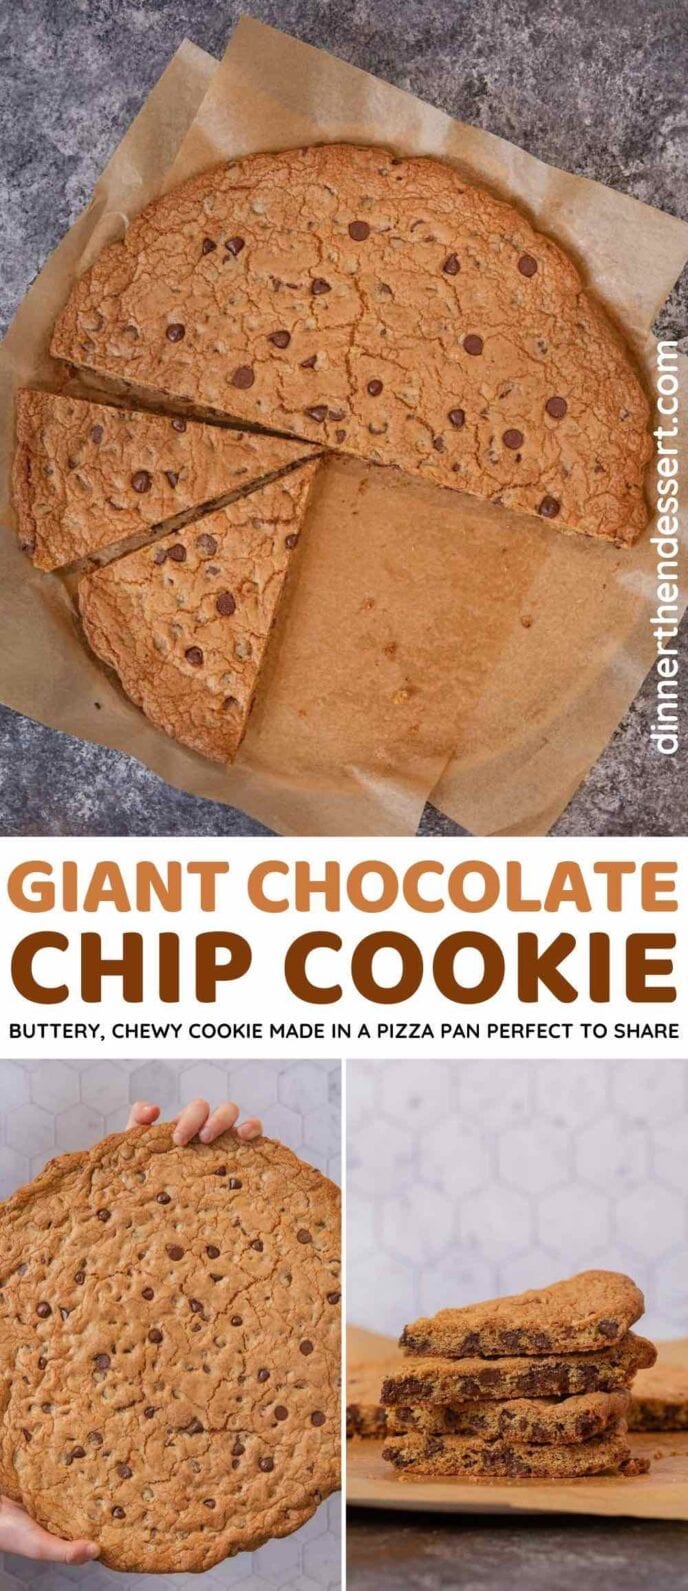 Giant Chocolate Chip Cookie photo collage